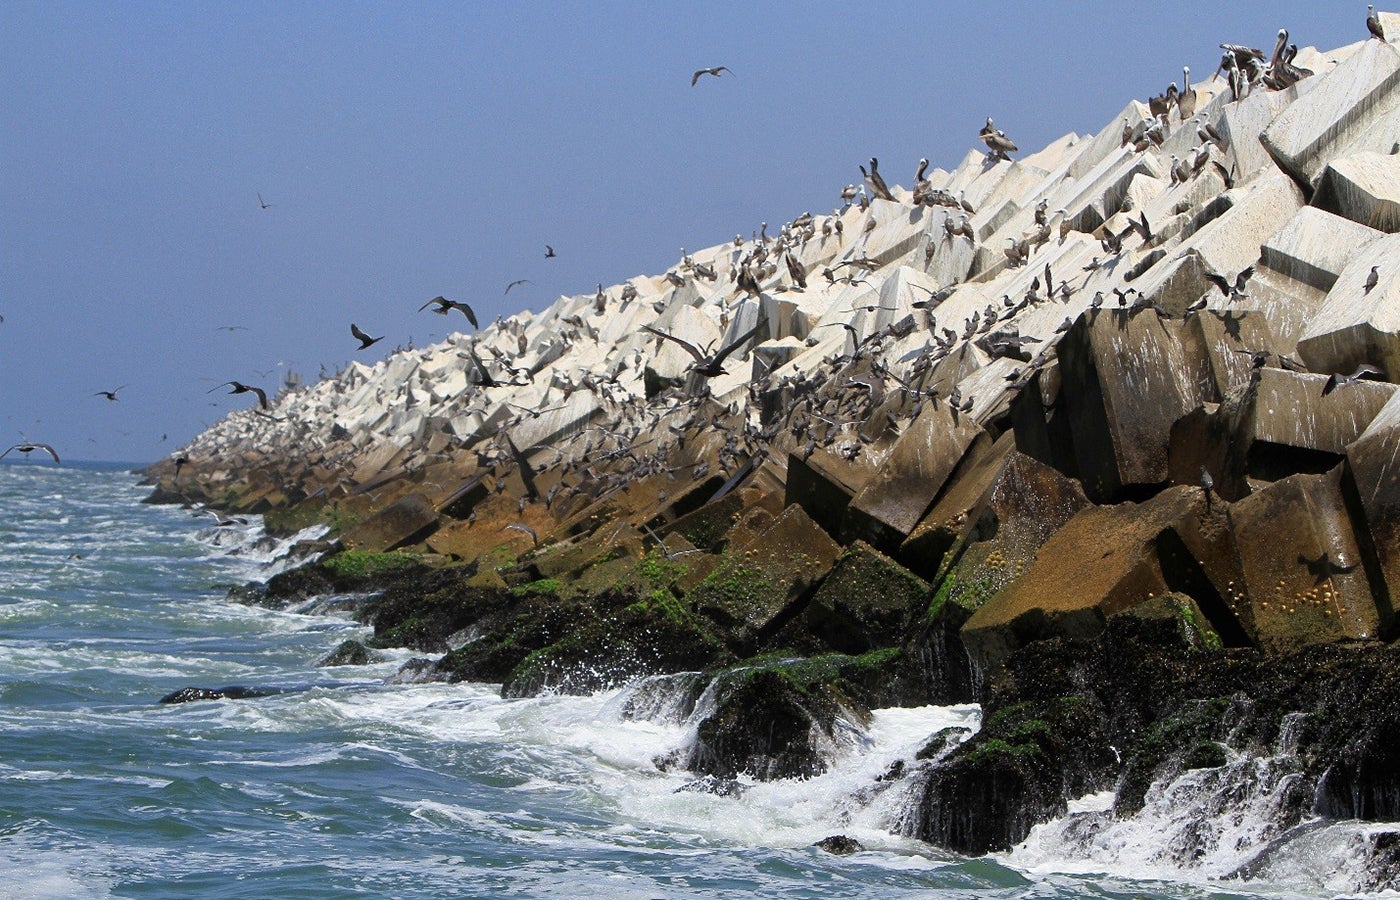 penguins flocking on the rocky side of the breakwater